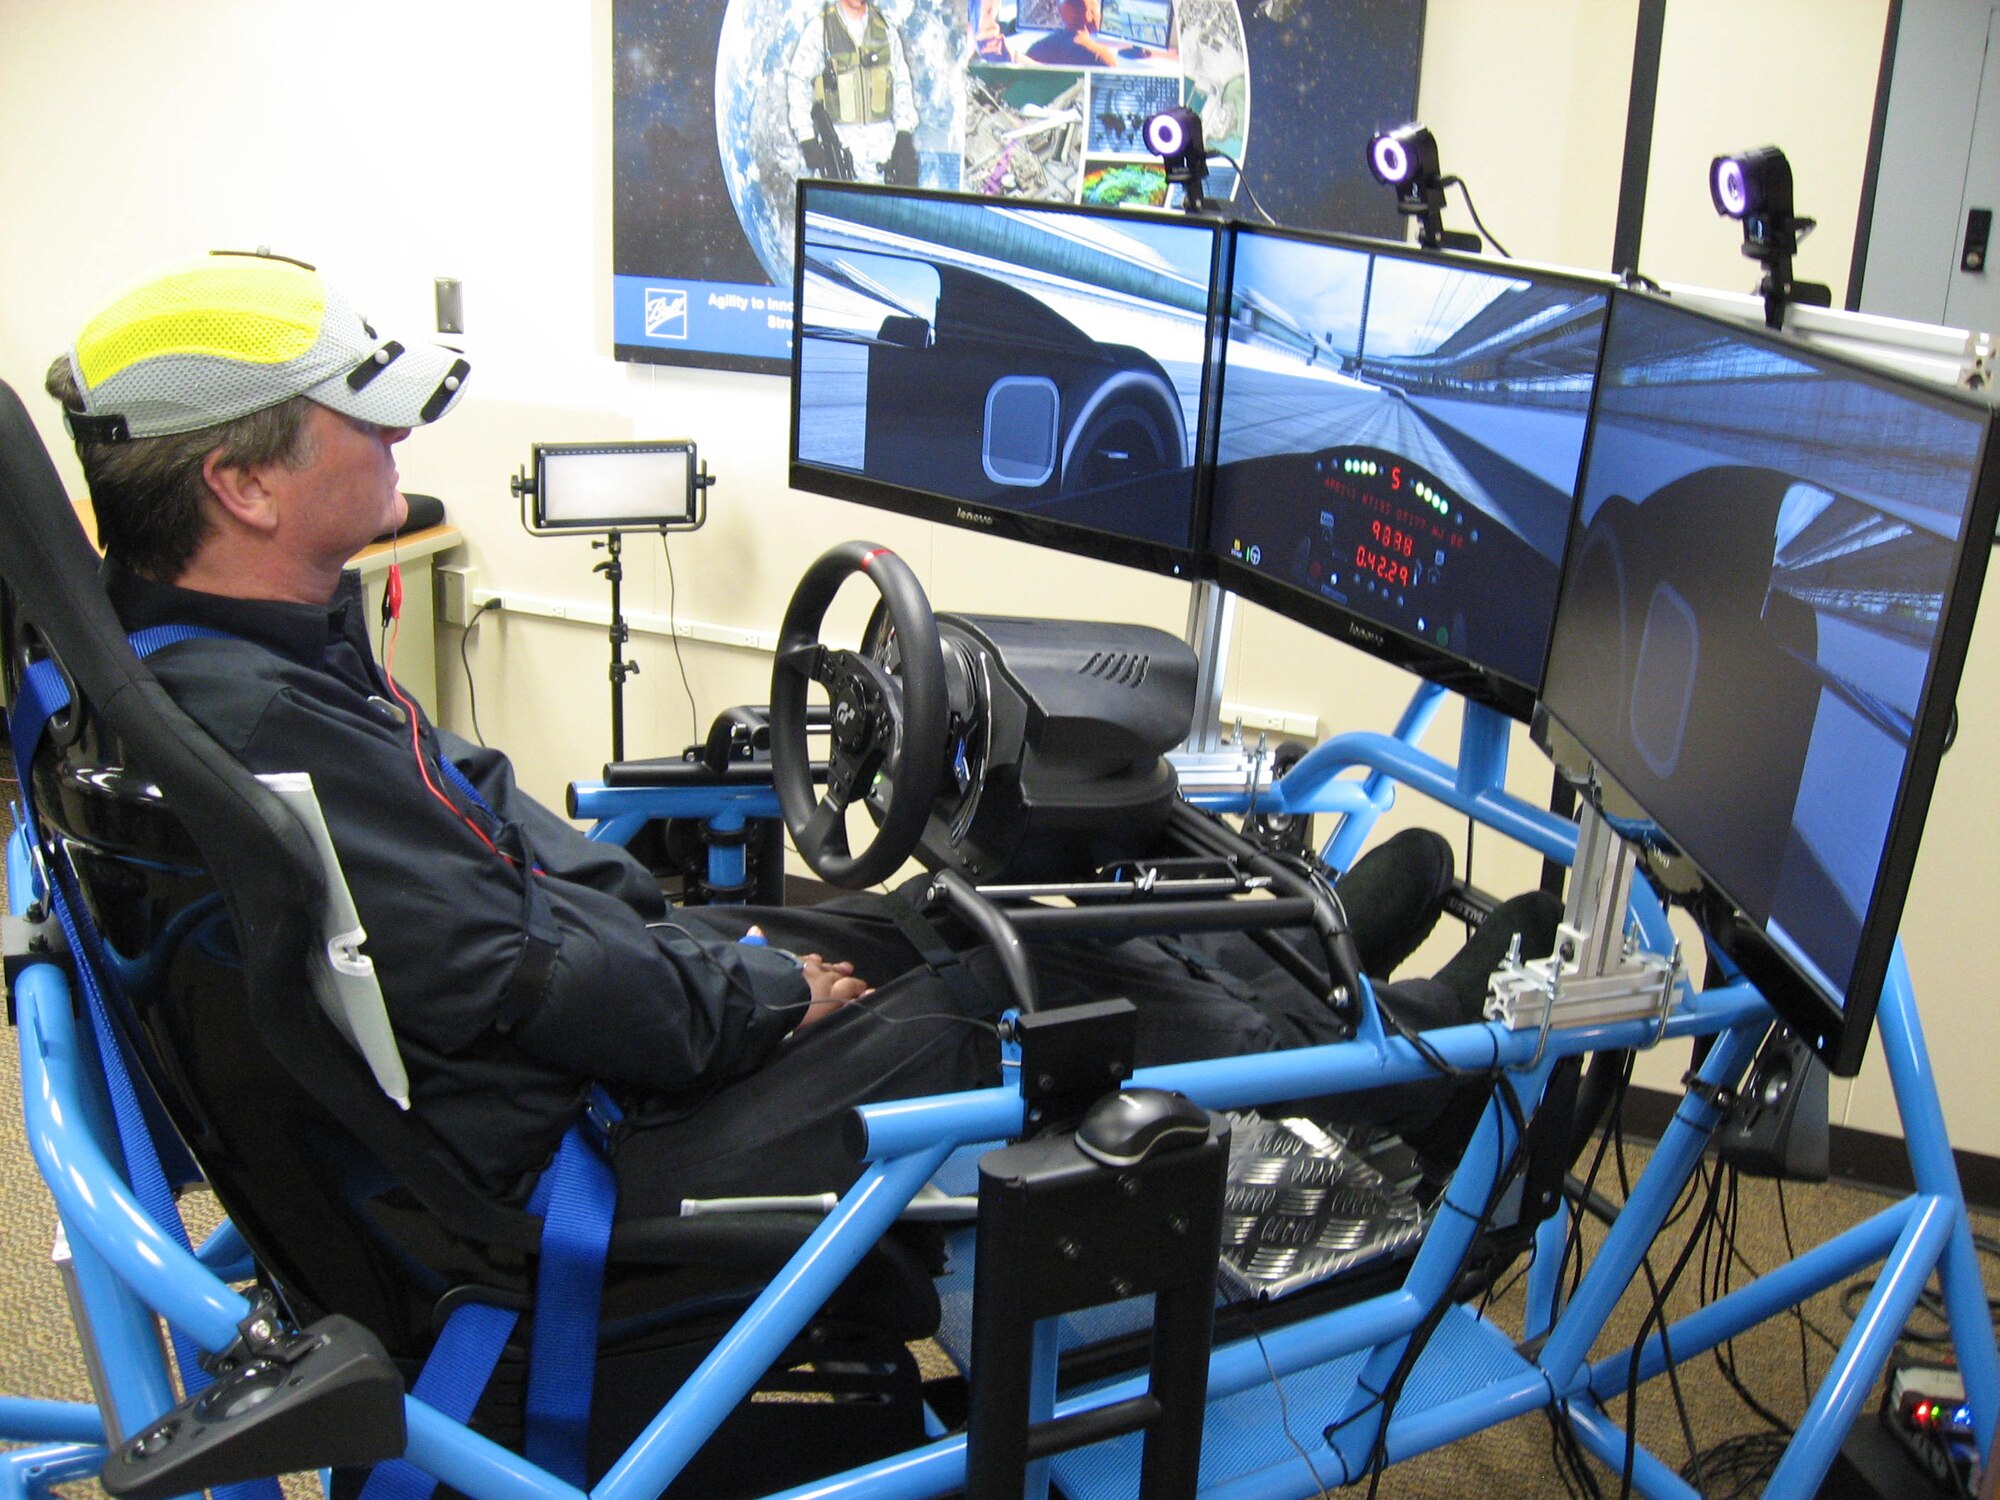 Sam Schmidt, former Indi Race Car driver sits in a car simulator driving on a simulated race tract at Indianapolis Motor Speedway.  Schmidt drives the car with human performance technologies.  During his practice section on March 20, he had the car up to 98 mph. (USAF photo by Ted Theopolos)